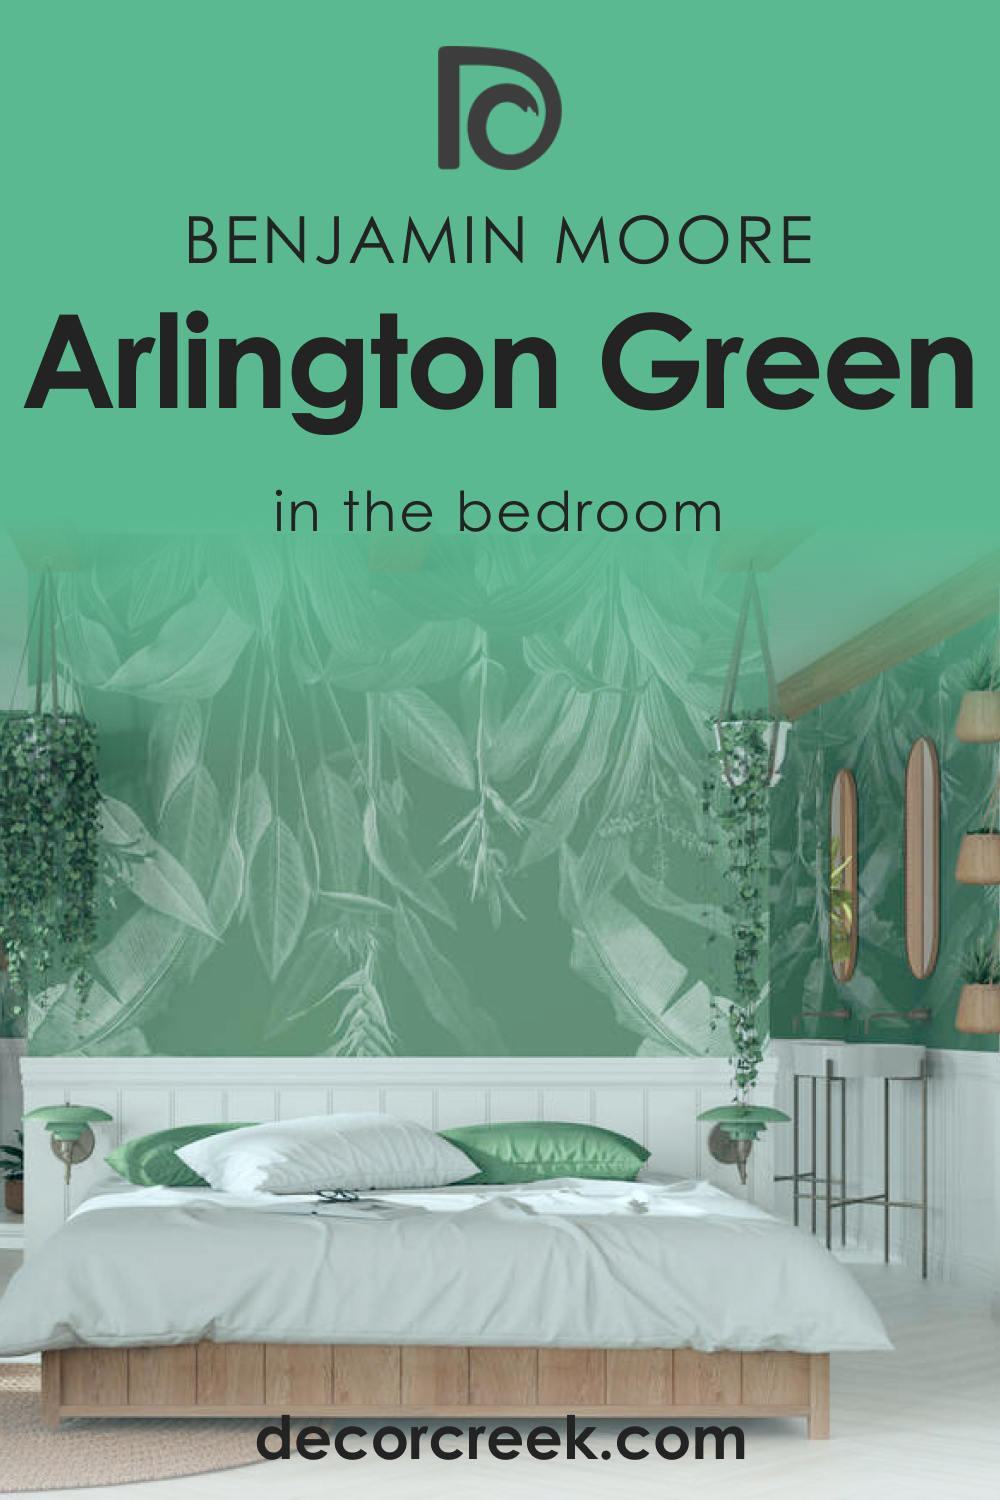 How to Use Arlington Green 580 in the Bedroom?